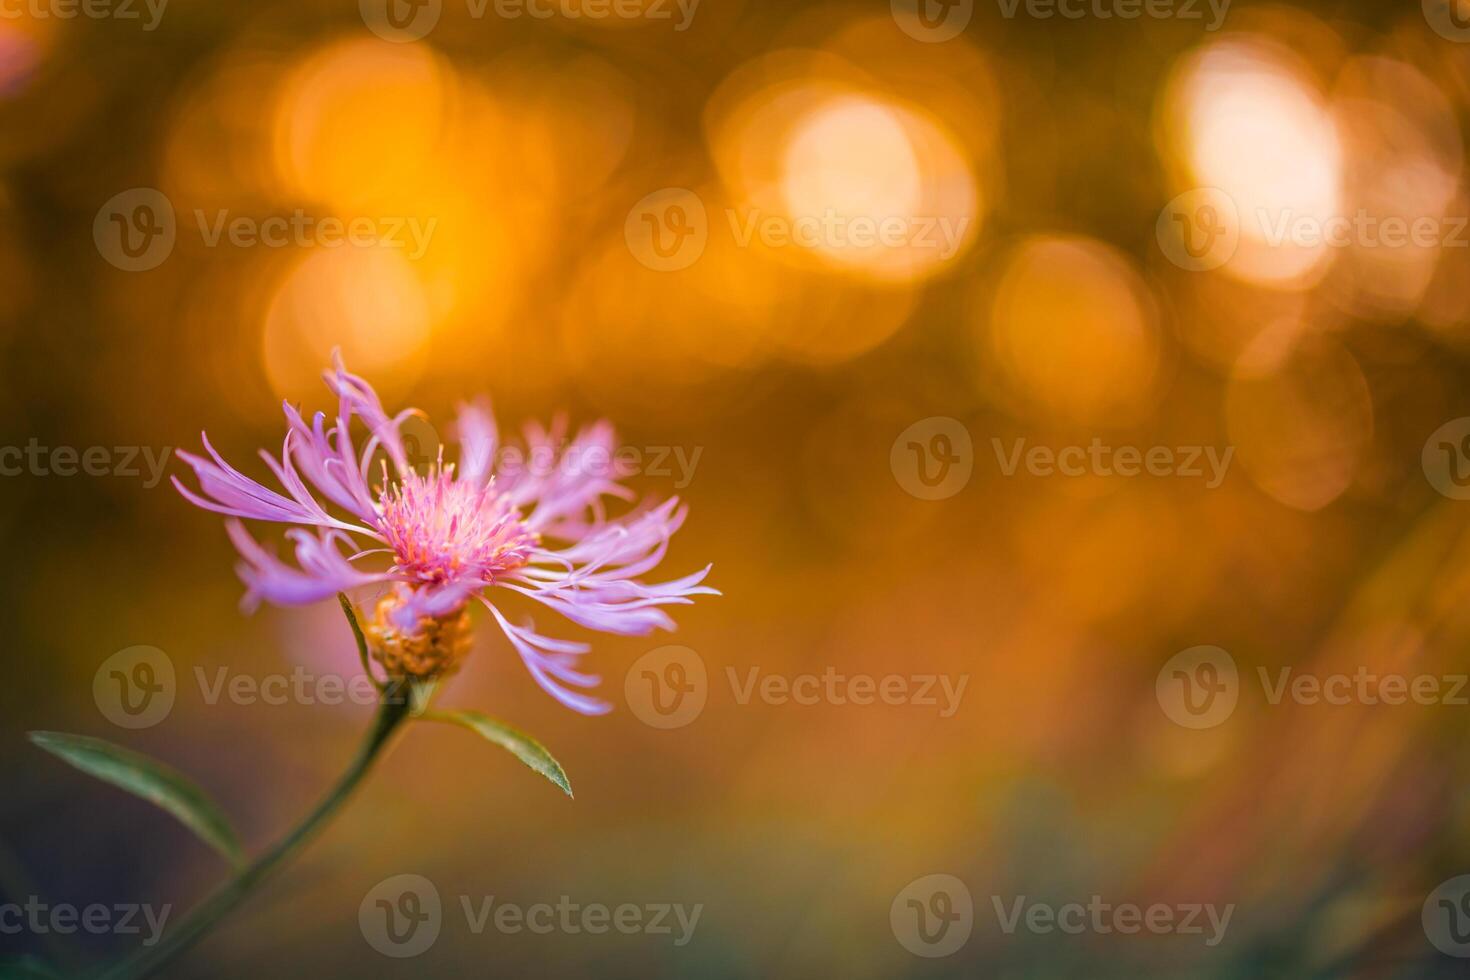 Inspirational summer nature background, bright flowers on blurry background, awesome colorful happy blooming summer flowers. Relaxing colors of nature photo